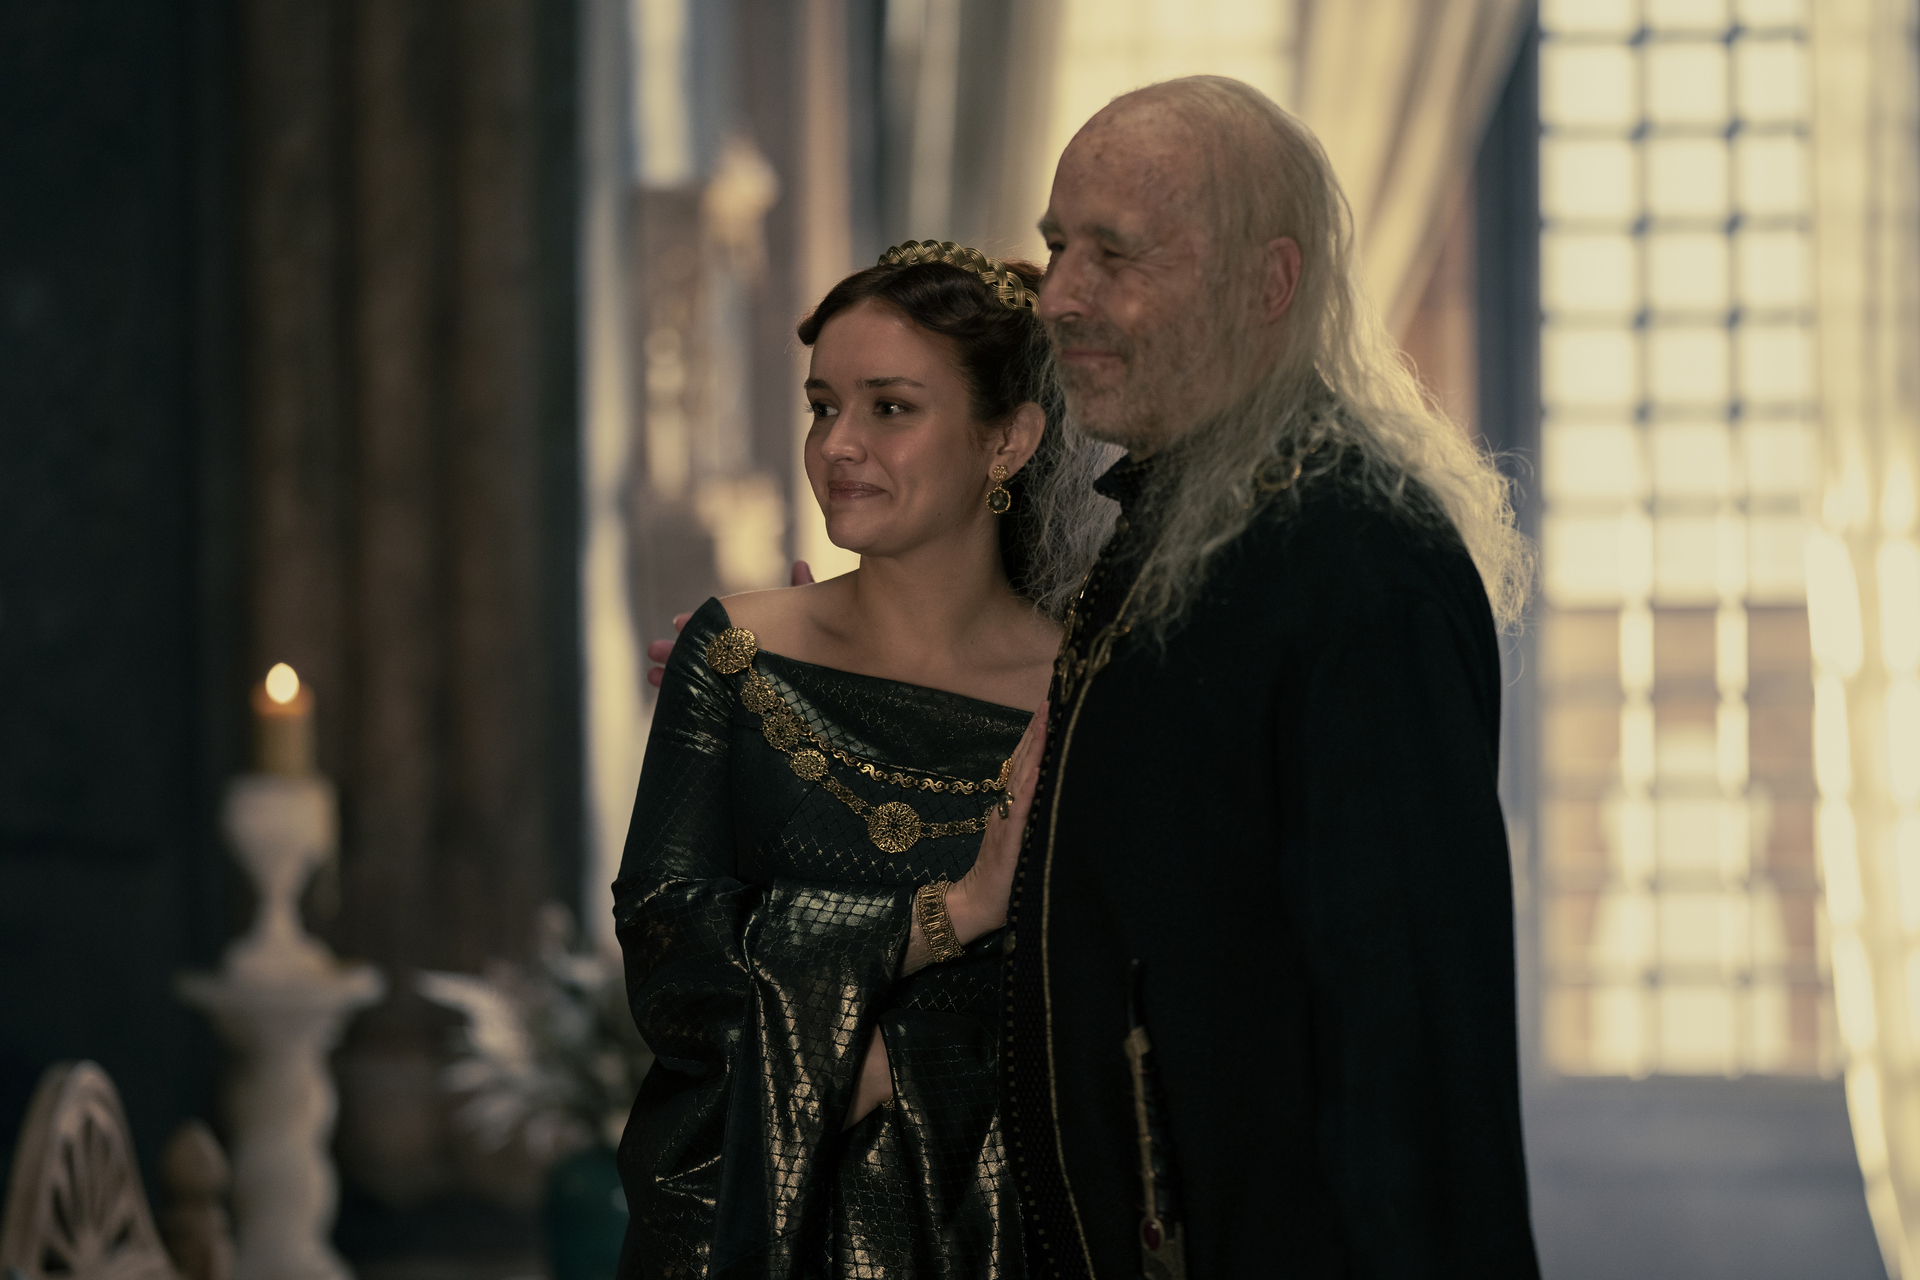 Alicent Hightower (played by Olivia Cooke) stands close to her husband Viserys Targaryen (played by Paddy Considine) resting her hand on his chest. Both are smiling, but Viserys looks quite sick. The image is from House of the Dragon episode 6.